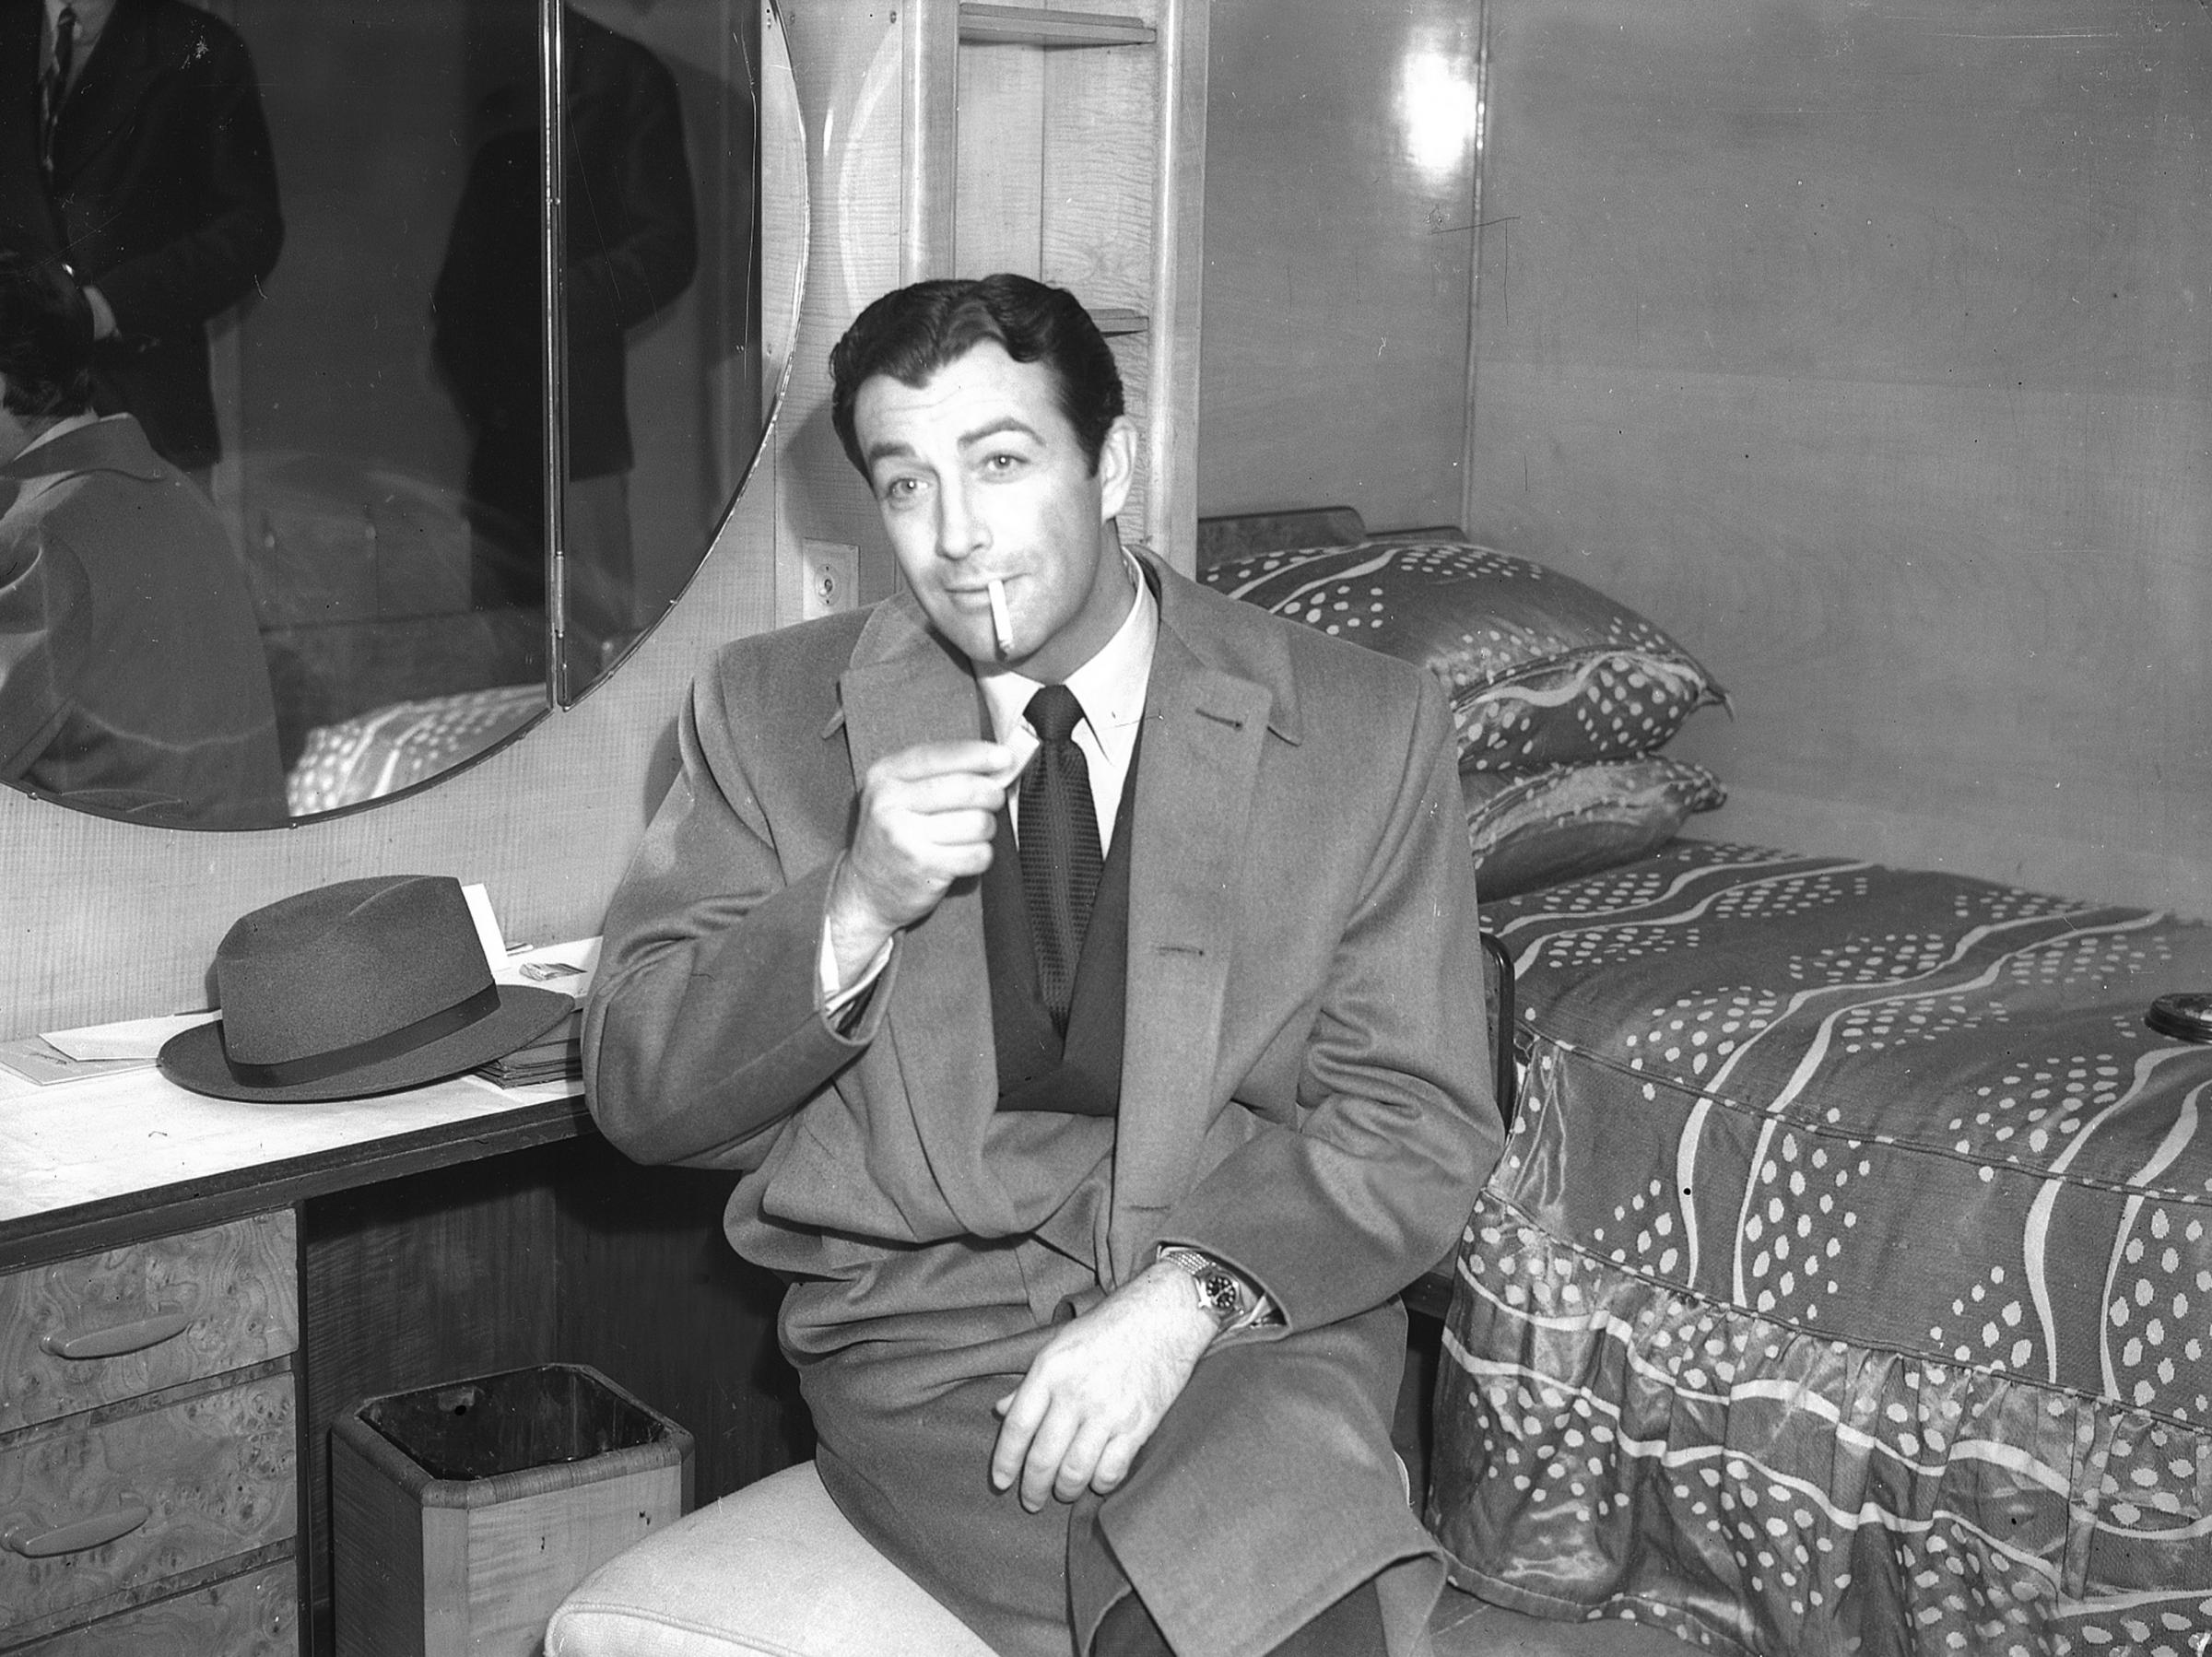 Robert Taylor, American film and television actor, born 1911. Taylor was one of the most popular leading men of his time. April 27, 1950. THE SOUTHERN DAILY ECHO ARCHIVES. Ref - 7237